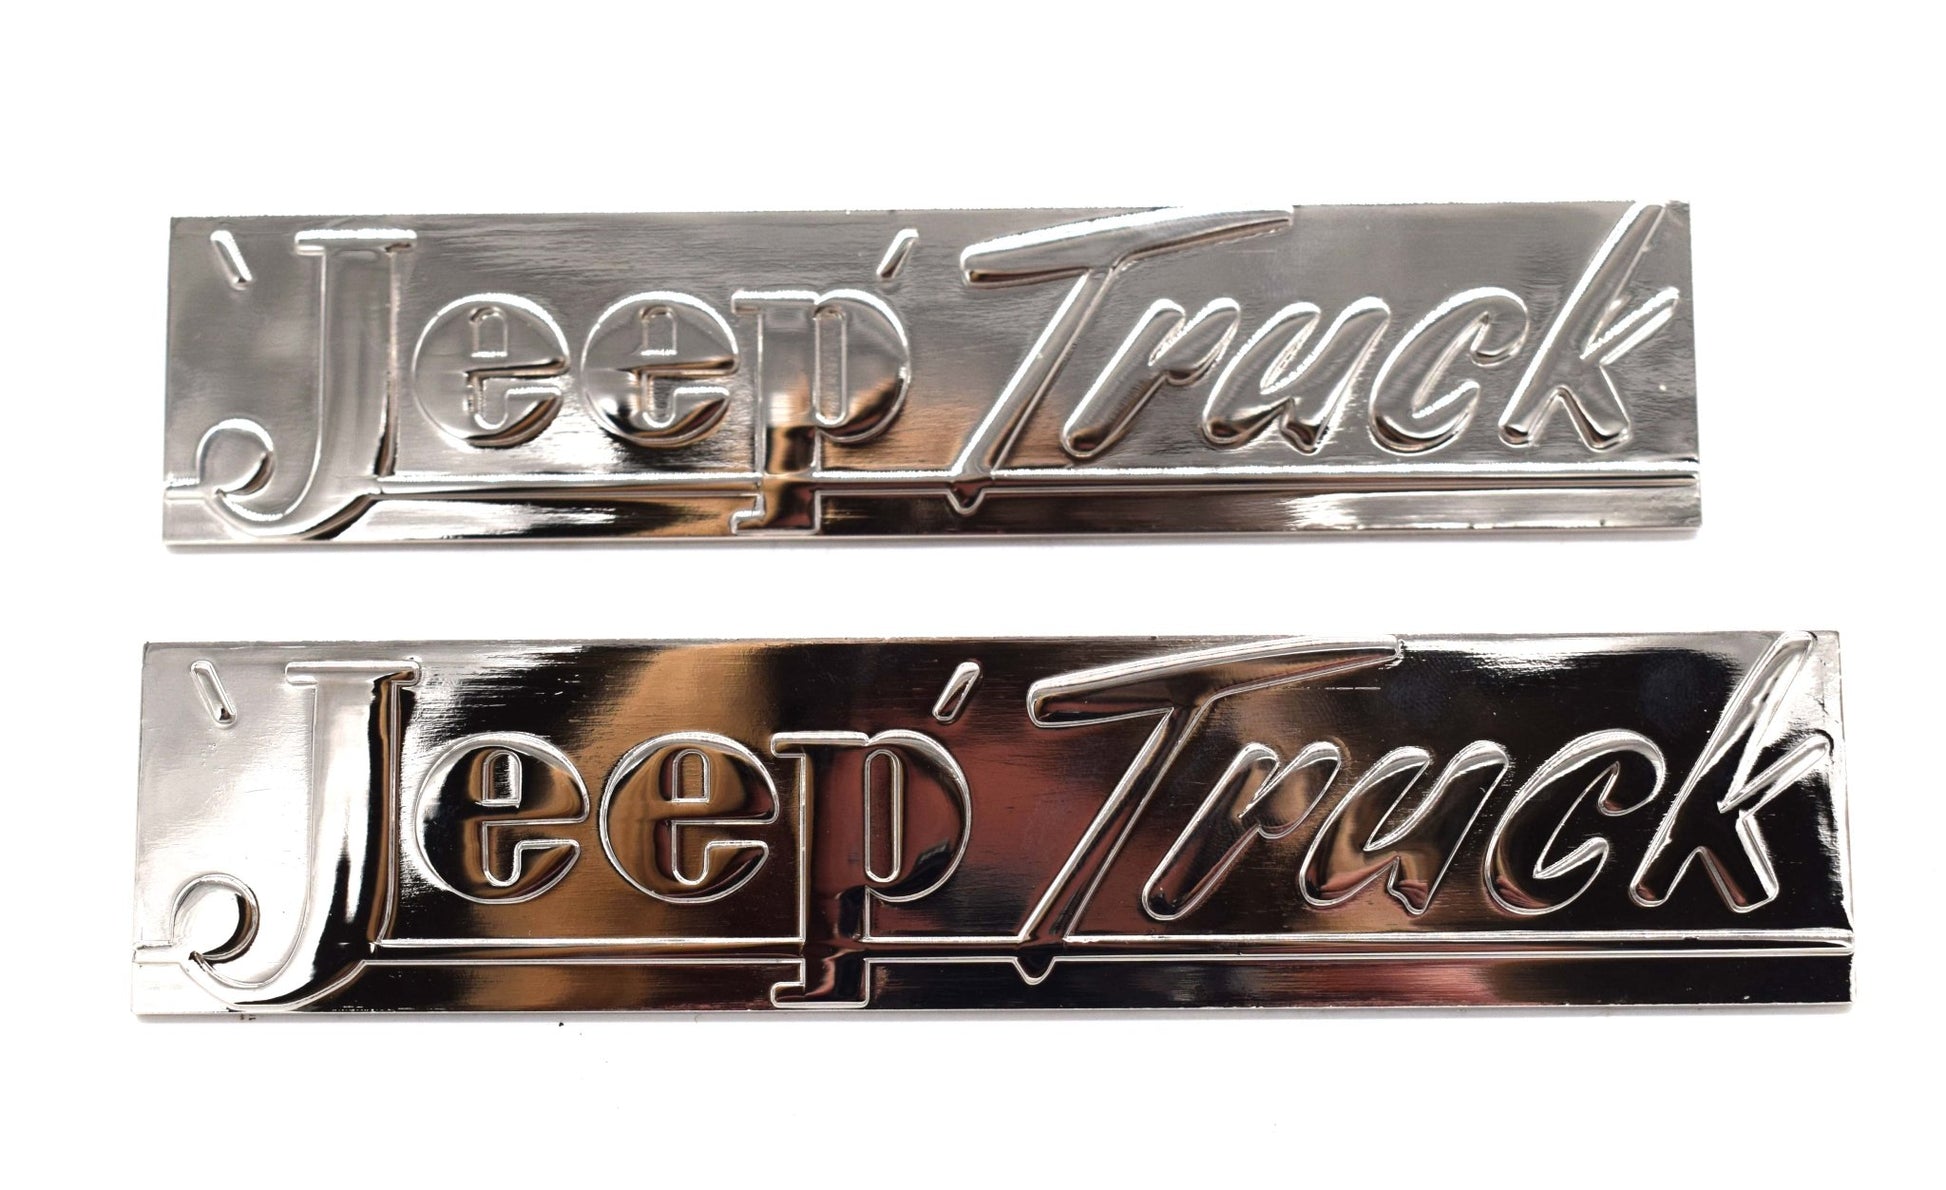 Chrome Hood "Jeep Truck" Name Plate Set, 1947-1949, Willys Pickup Truck - The JeepsterMan